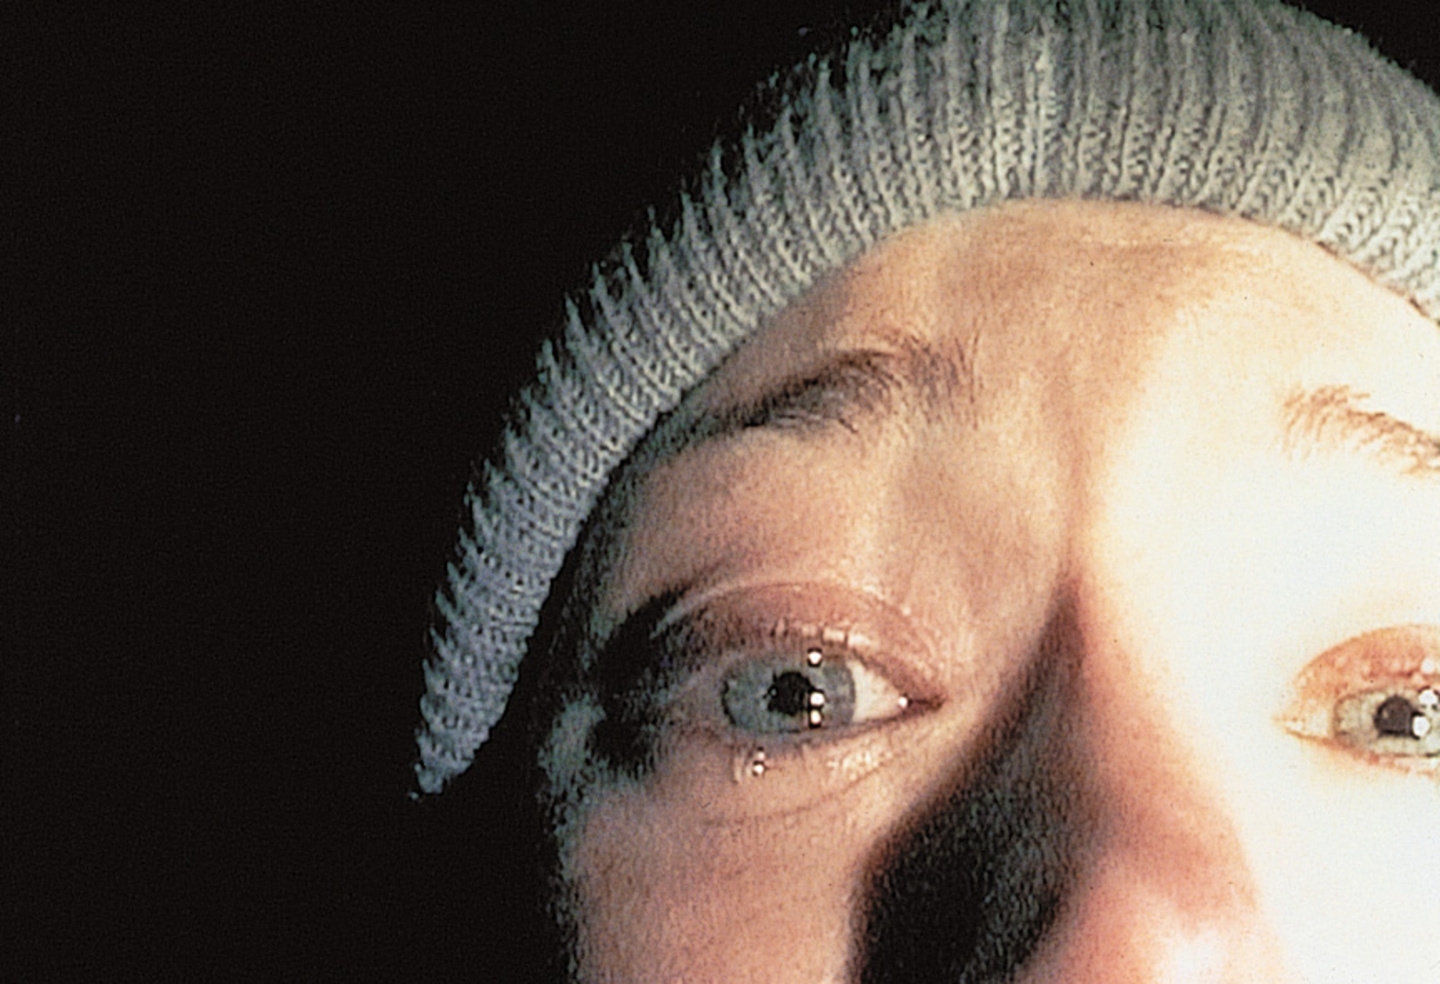 Blair Witch Project / Heather Donahue